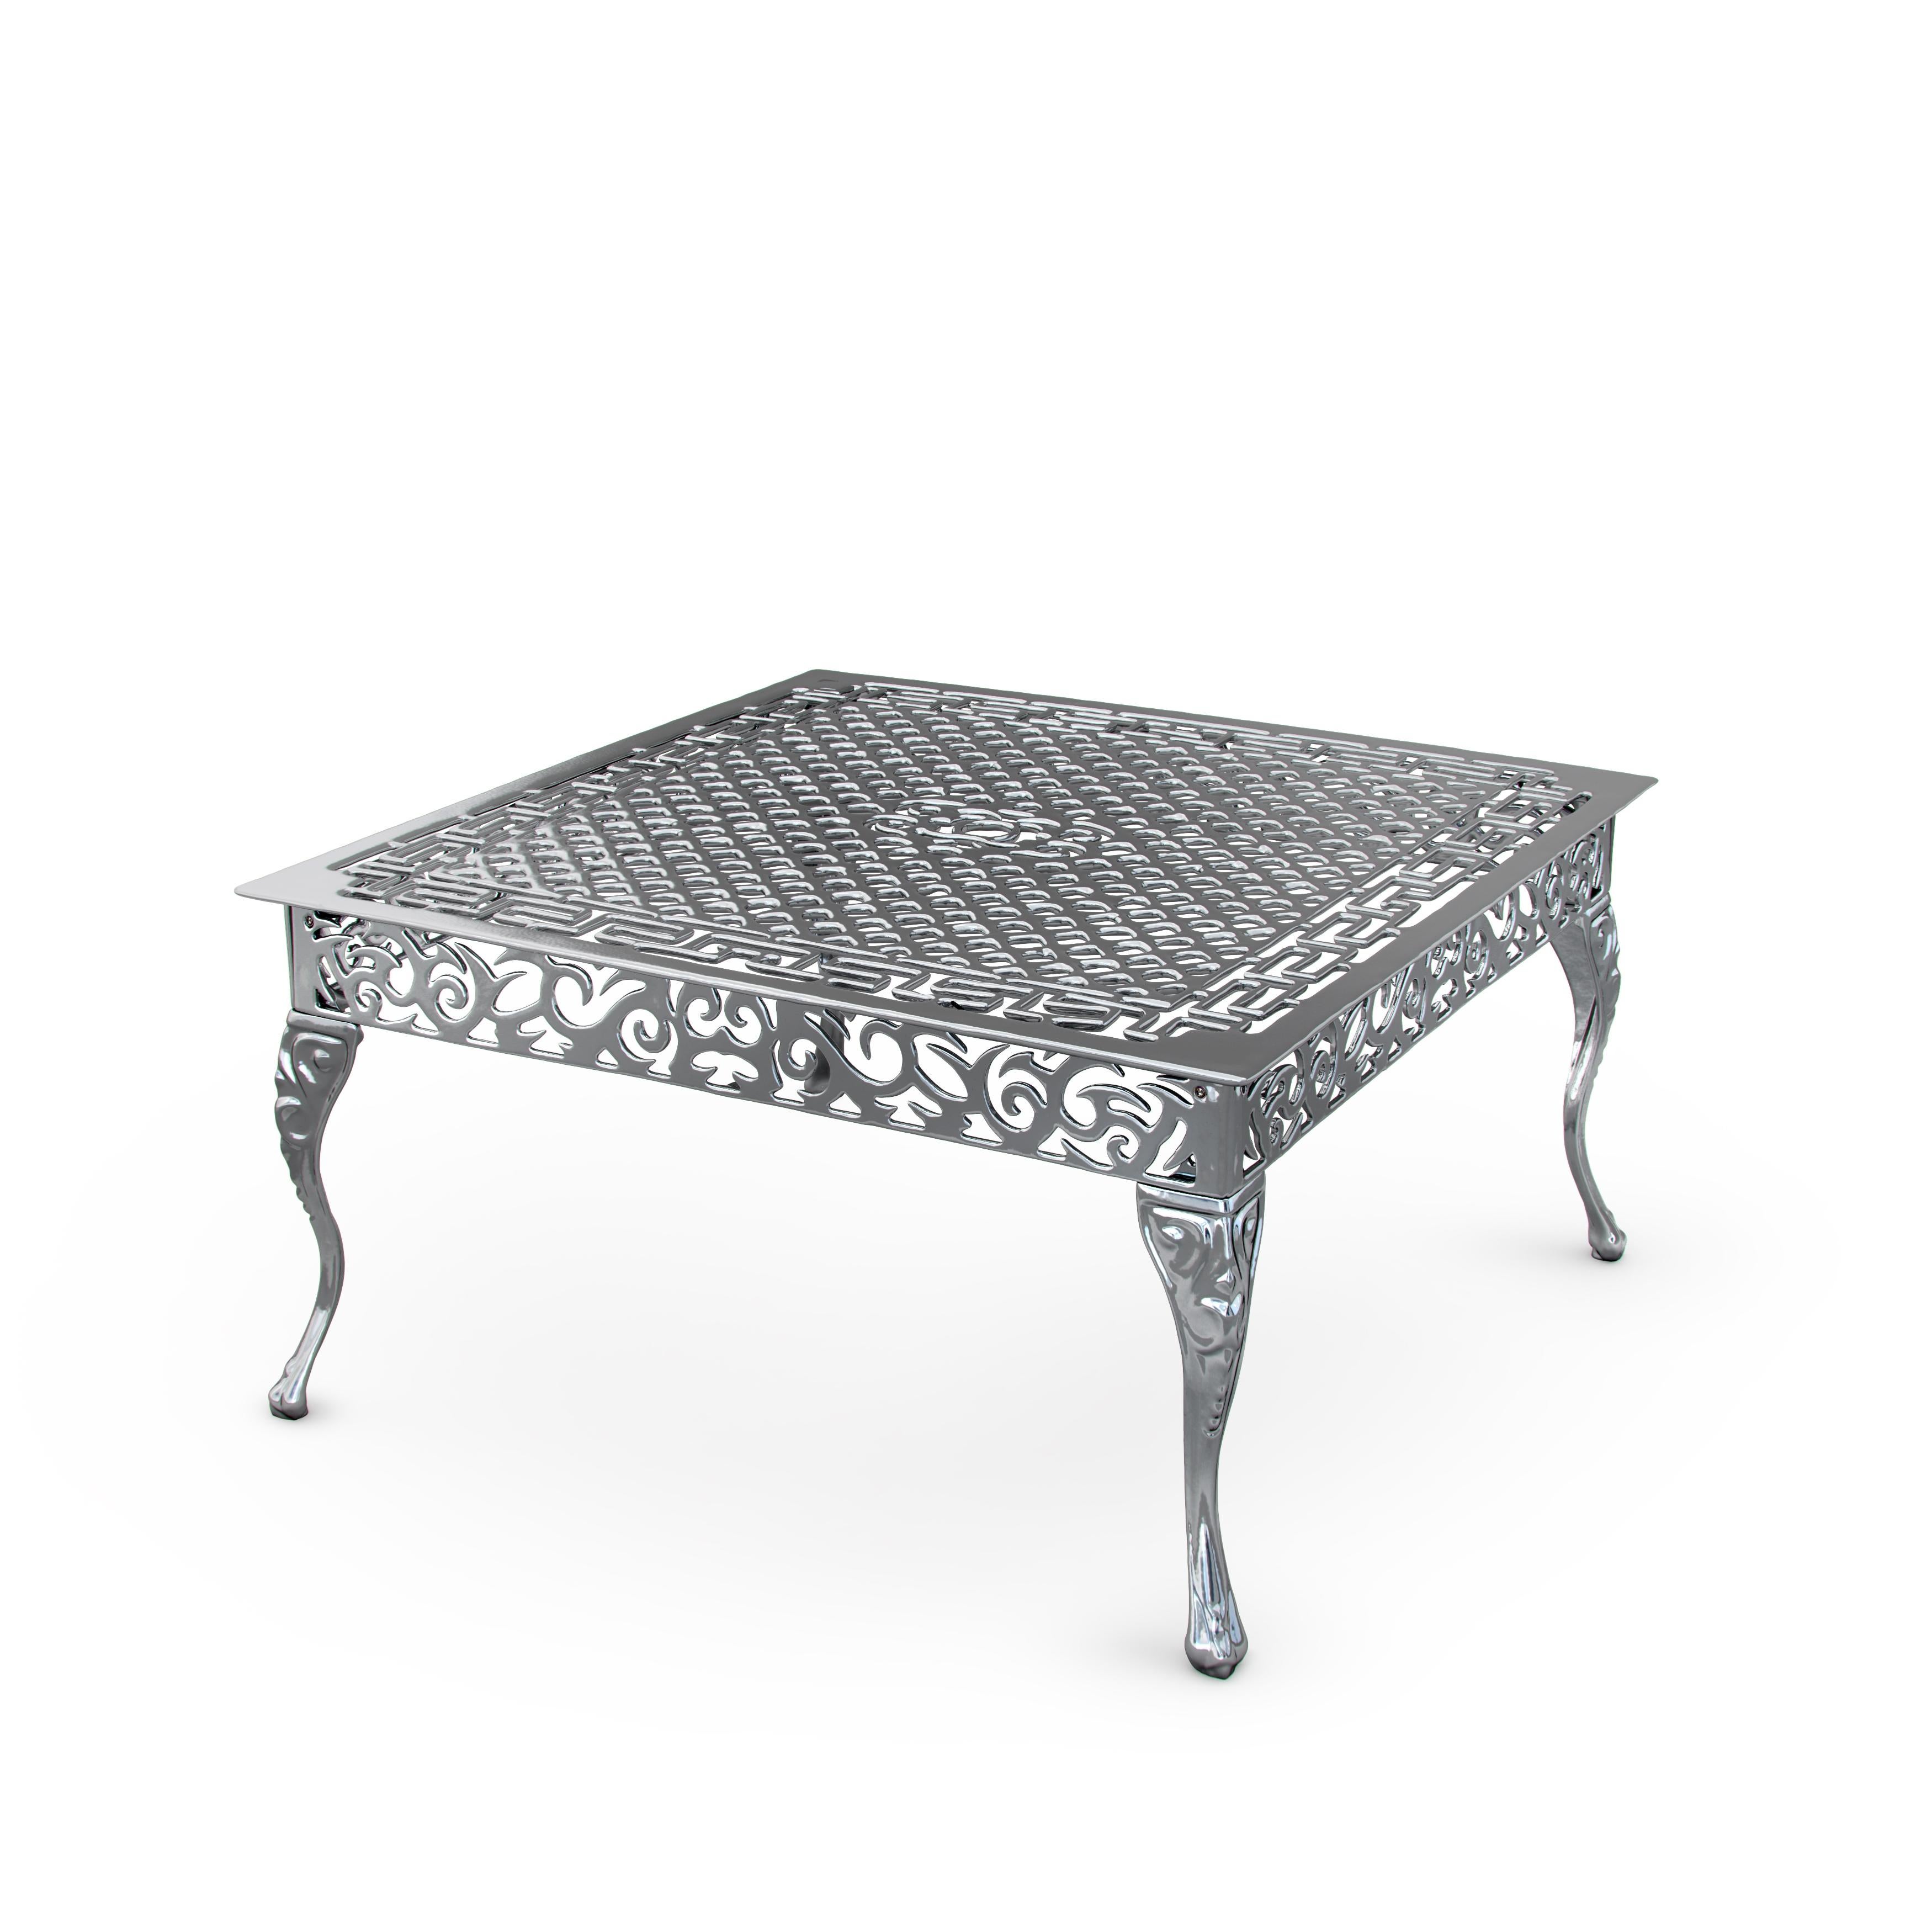 Italian Cama, Outdoor Aluminum Coffee Table with Chrome Finish, Made in Italy For Sale